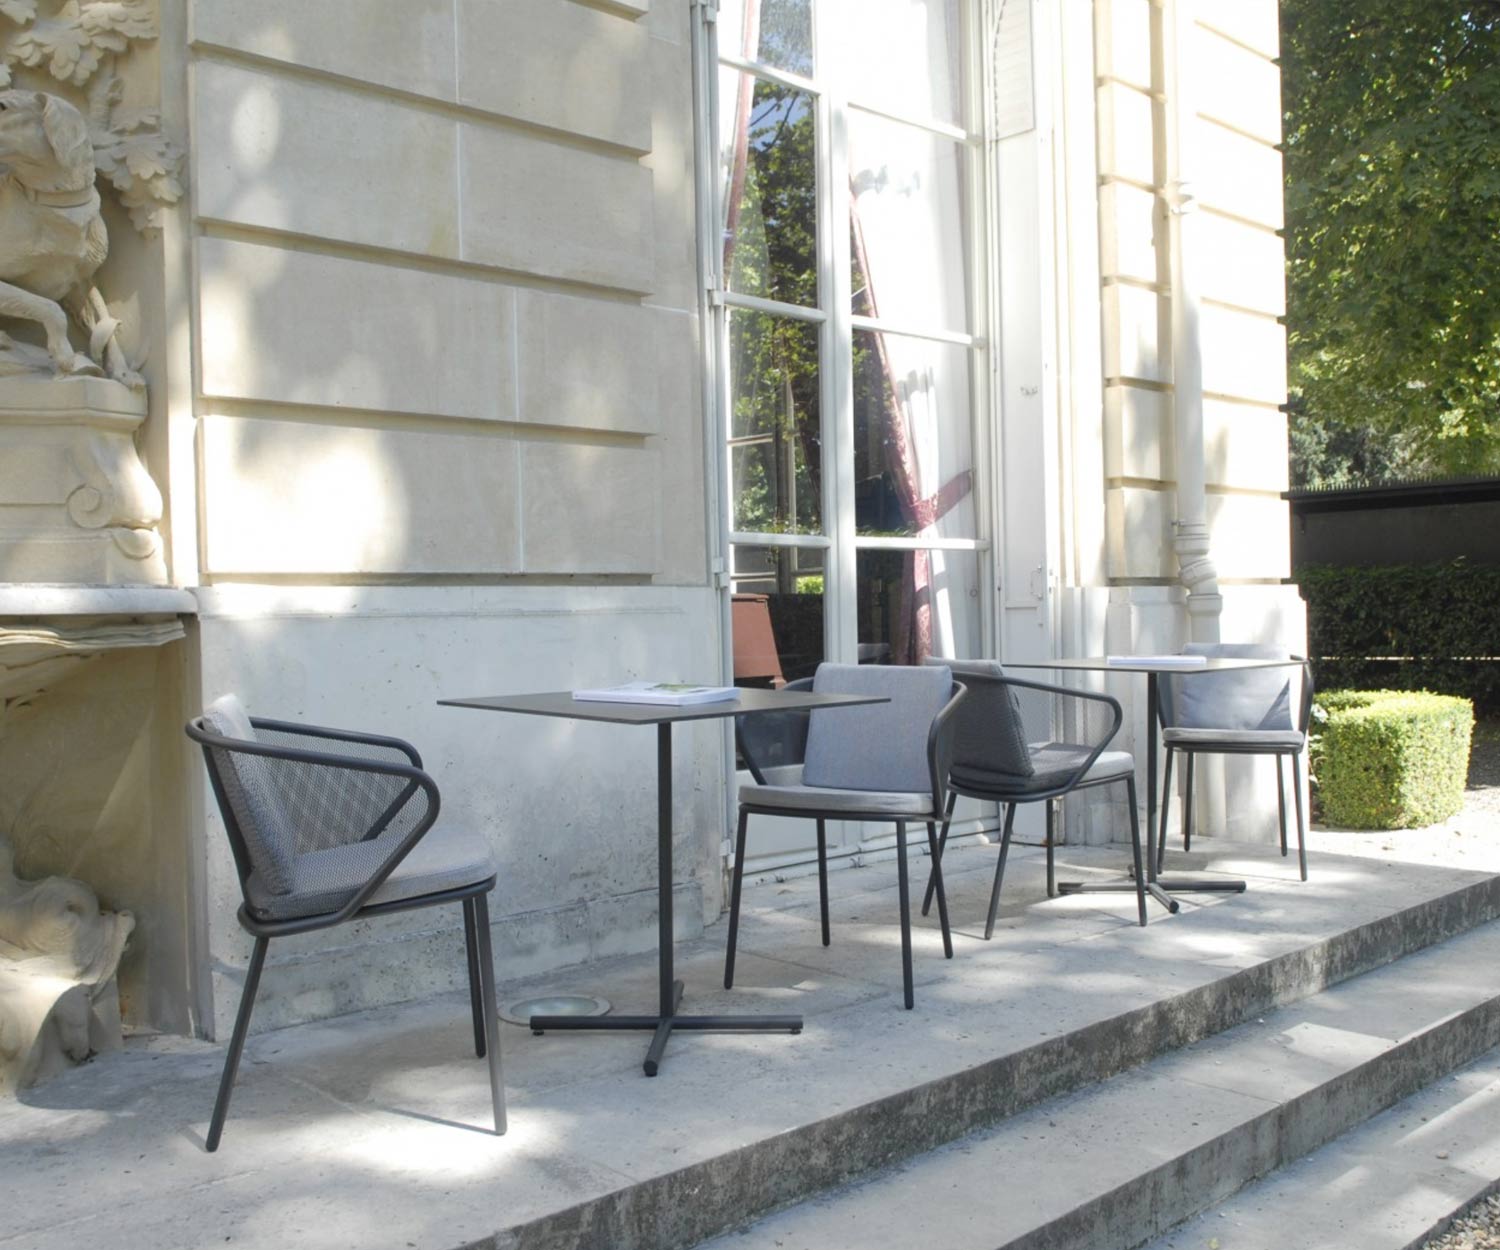 High-quality Todus Condor design bistro table on a terrace